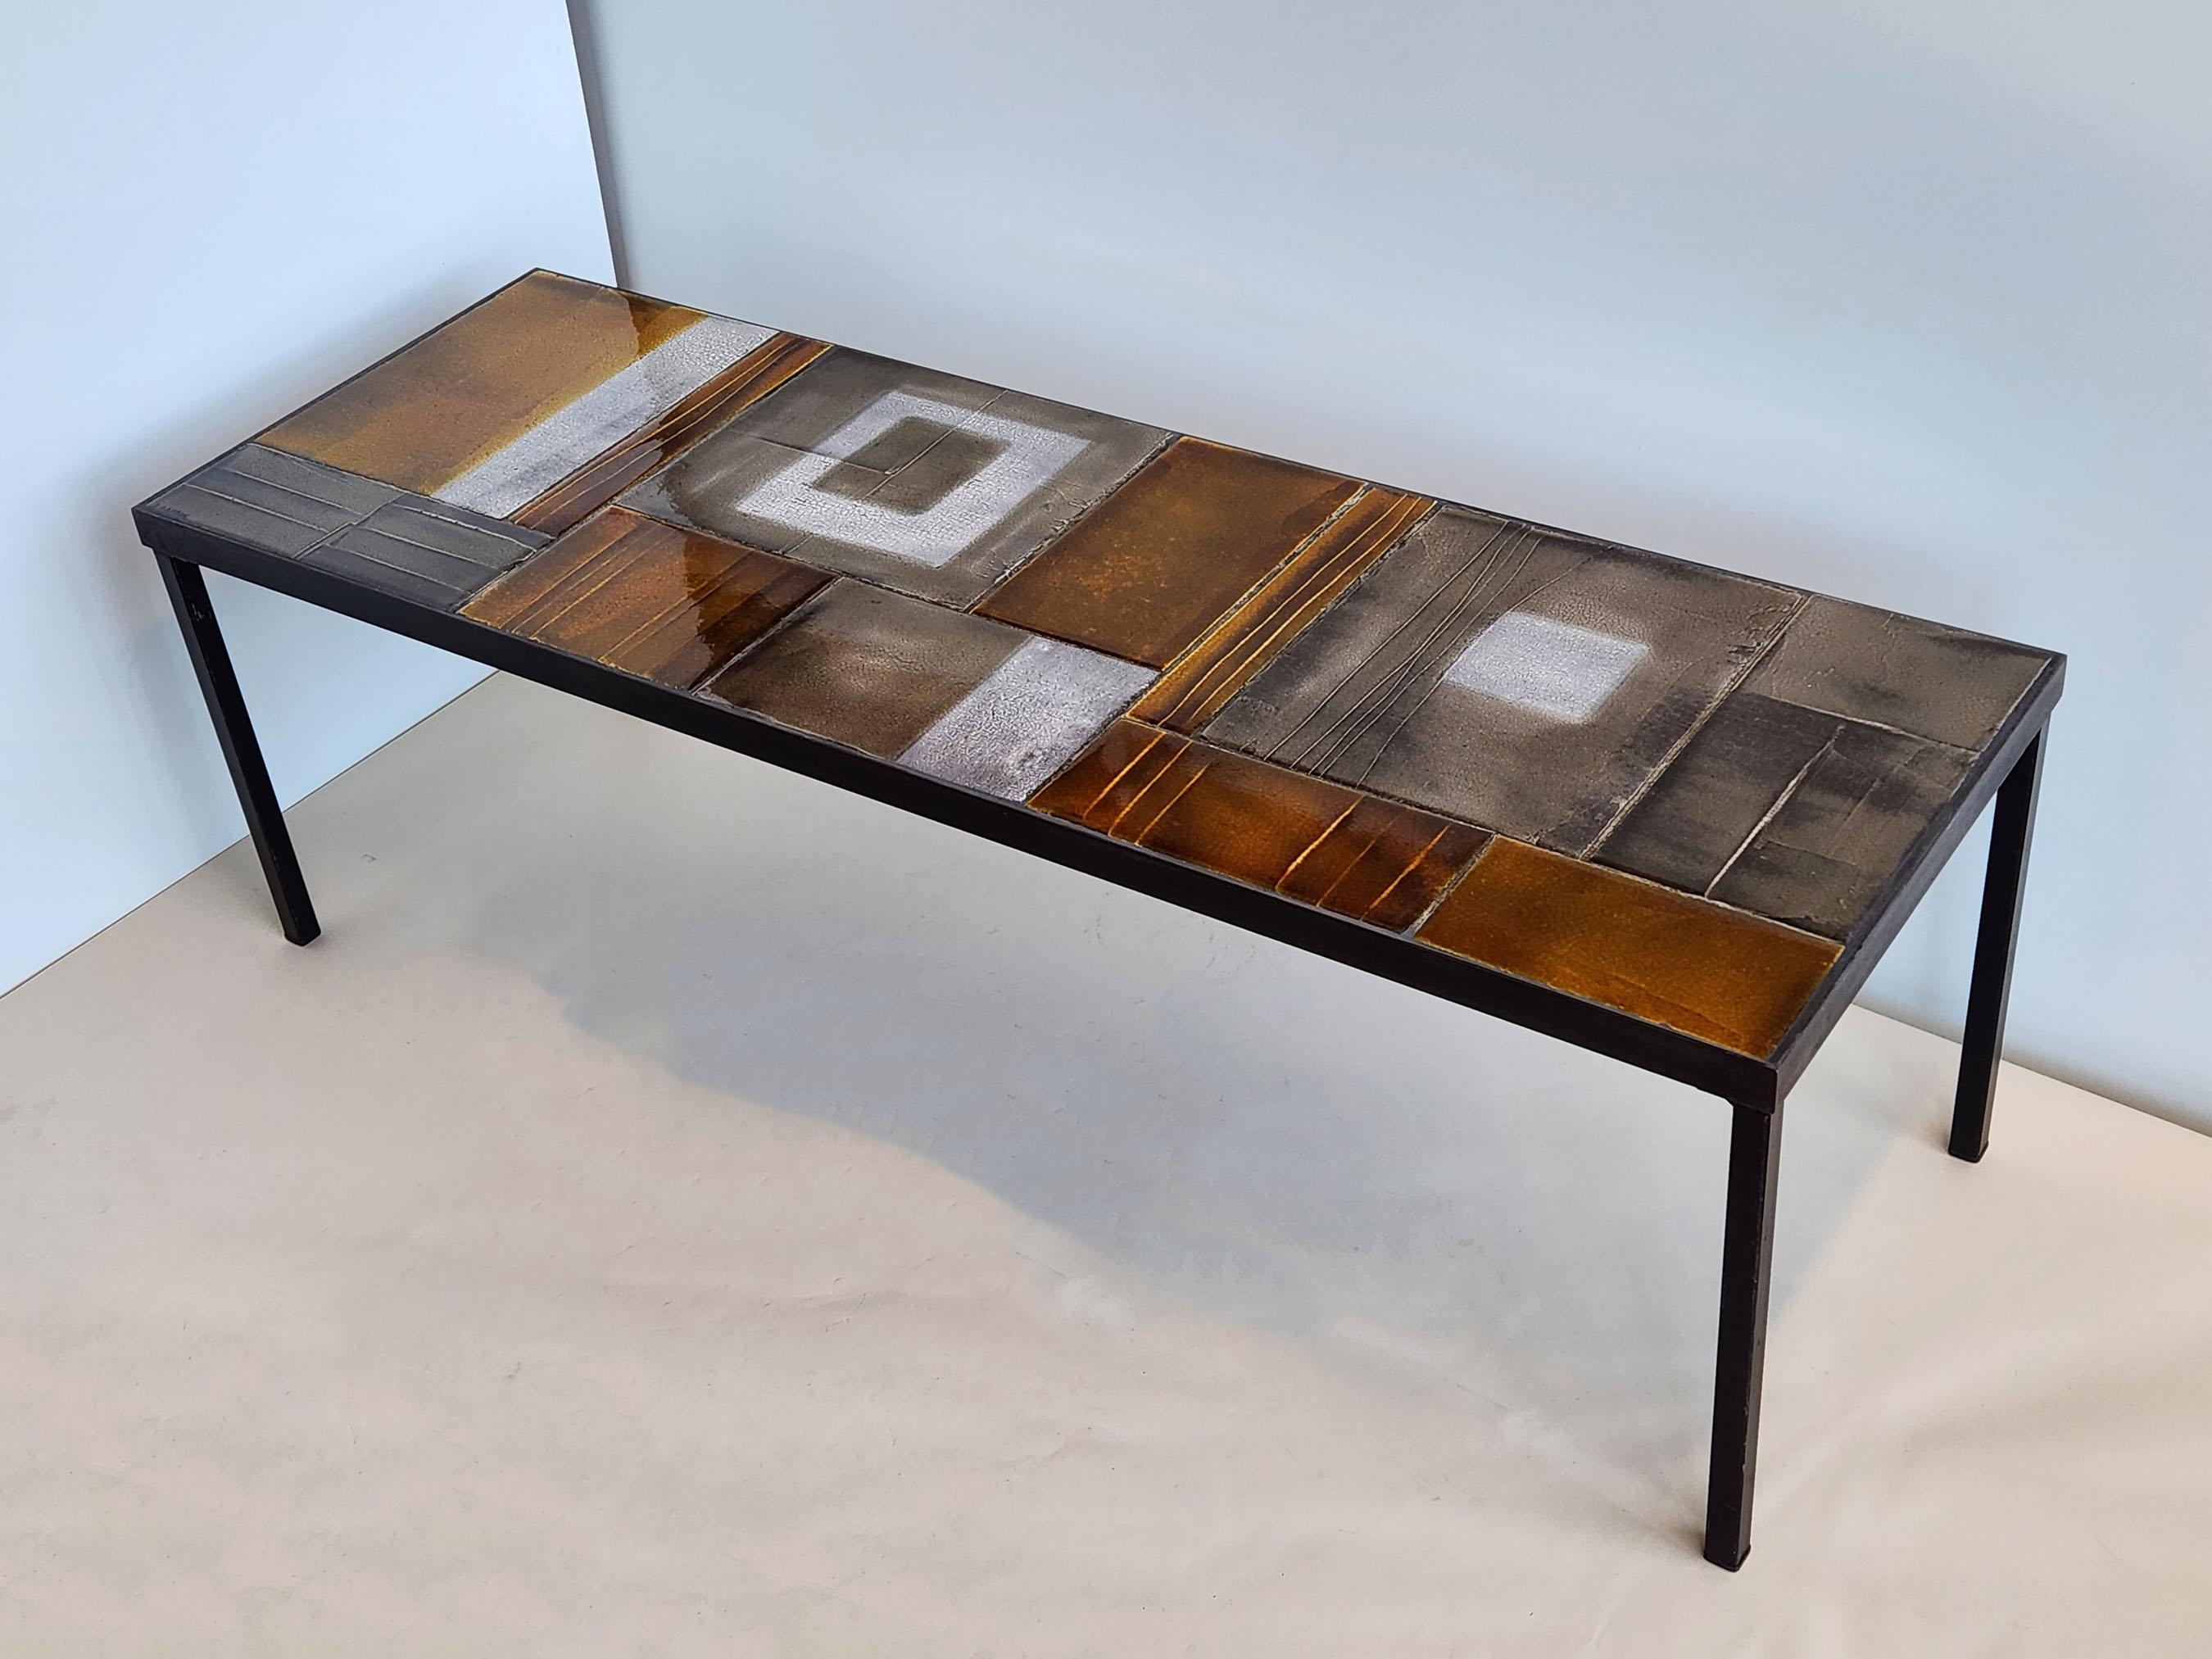 Looking for a spectacular ceramic coffee table! Look no further.

Ceramic top with pleasing modulations and contrasts between colors (Off-white, gray, amber and gold), textures (smooth, rough), linings (texture lines, designed lines and grout